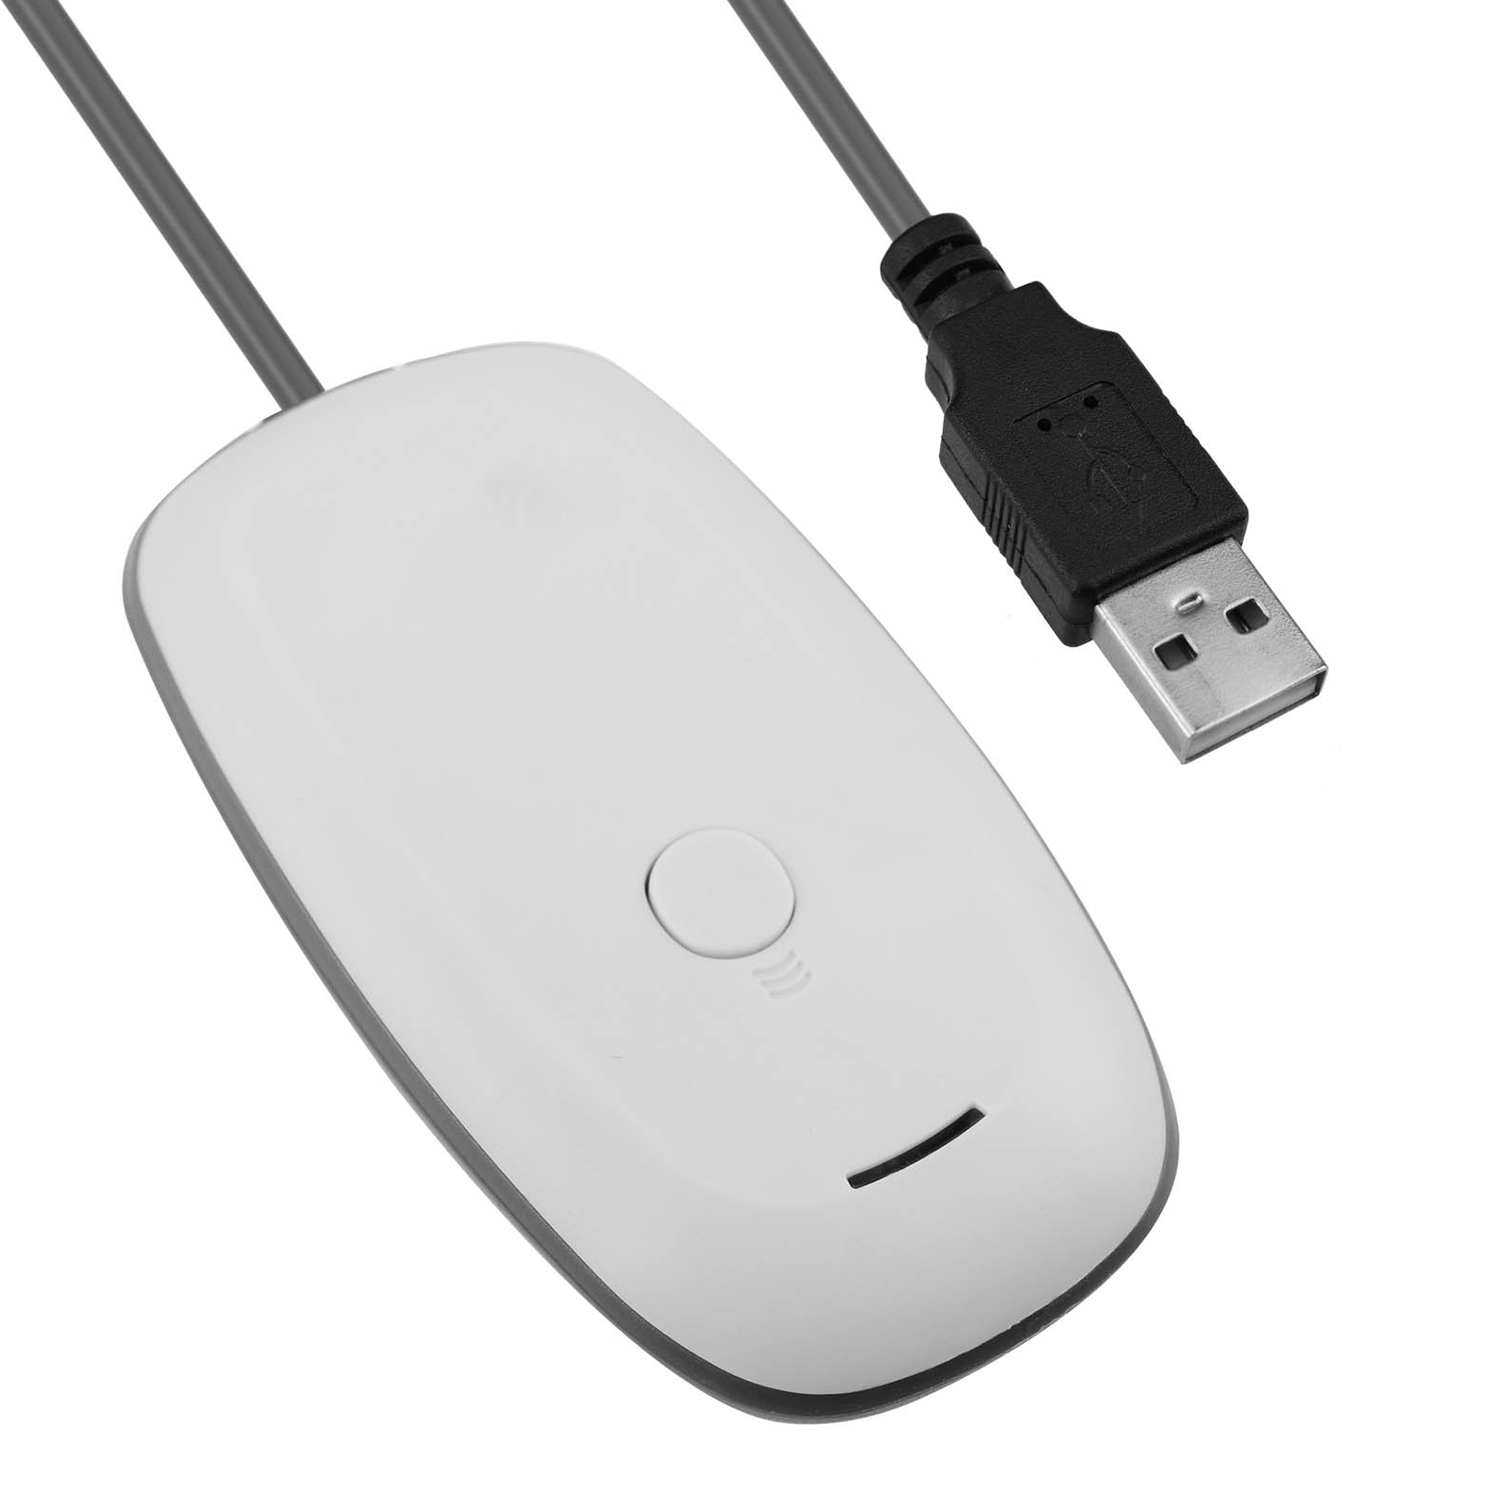 360 wireless adapter for pc